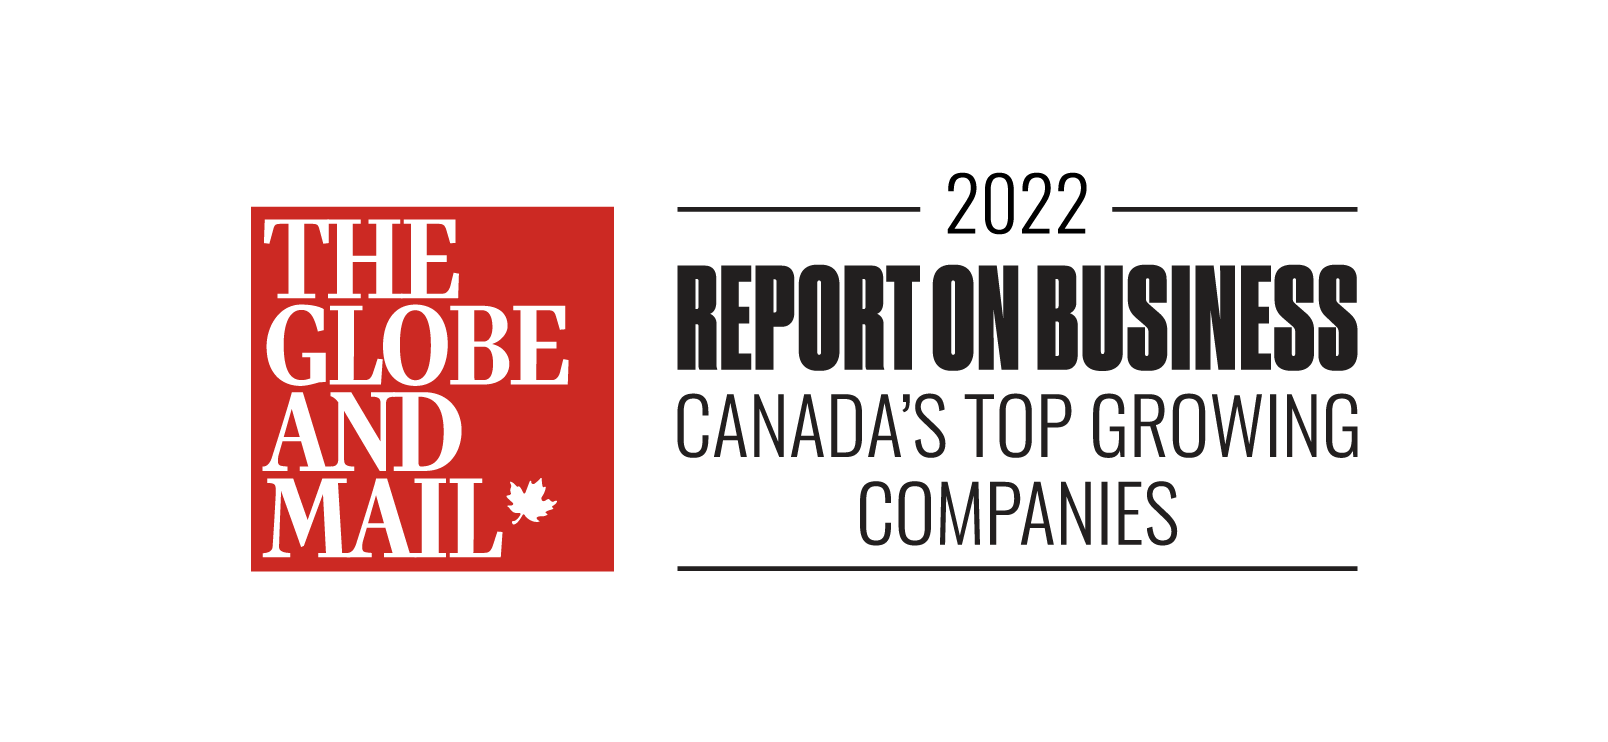 NOVARC TECHNOLOGIES NAMED TO THE GLOBE AND MAIL’S 2022 RANKING OF CANADA’S TOP GROWING COMPANIES FOR THE THIRD CONSECUTIVE YEAR